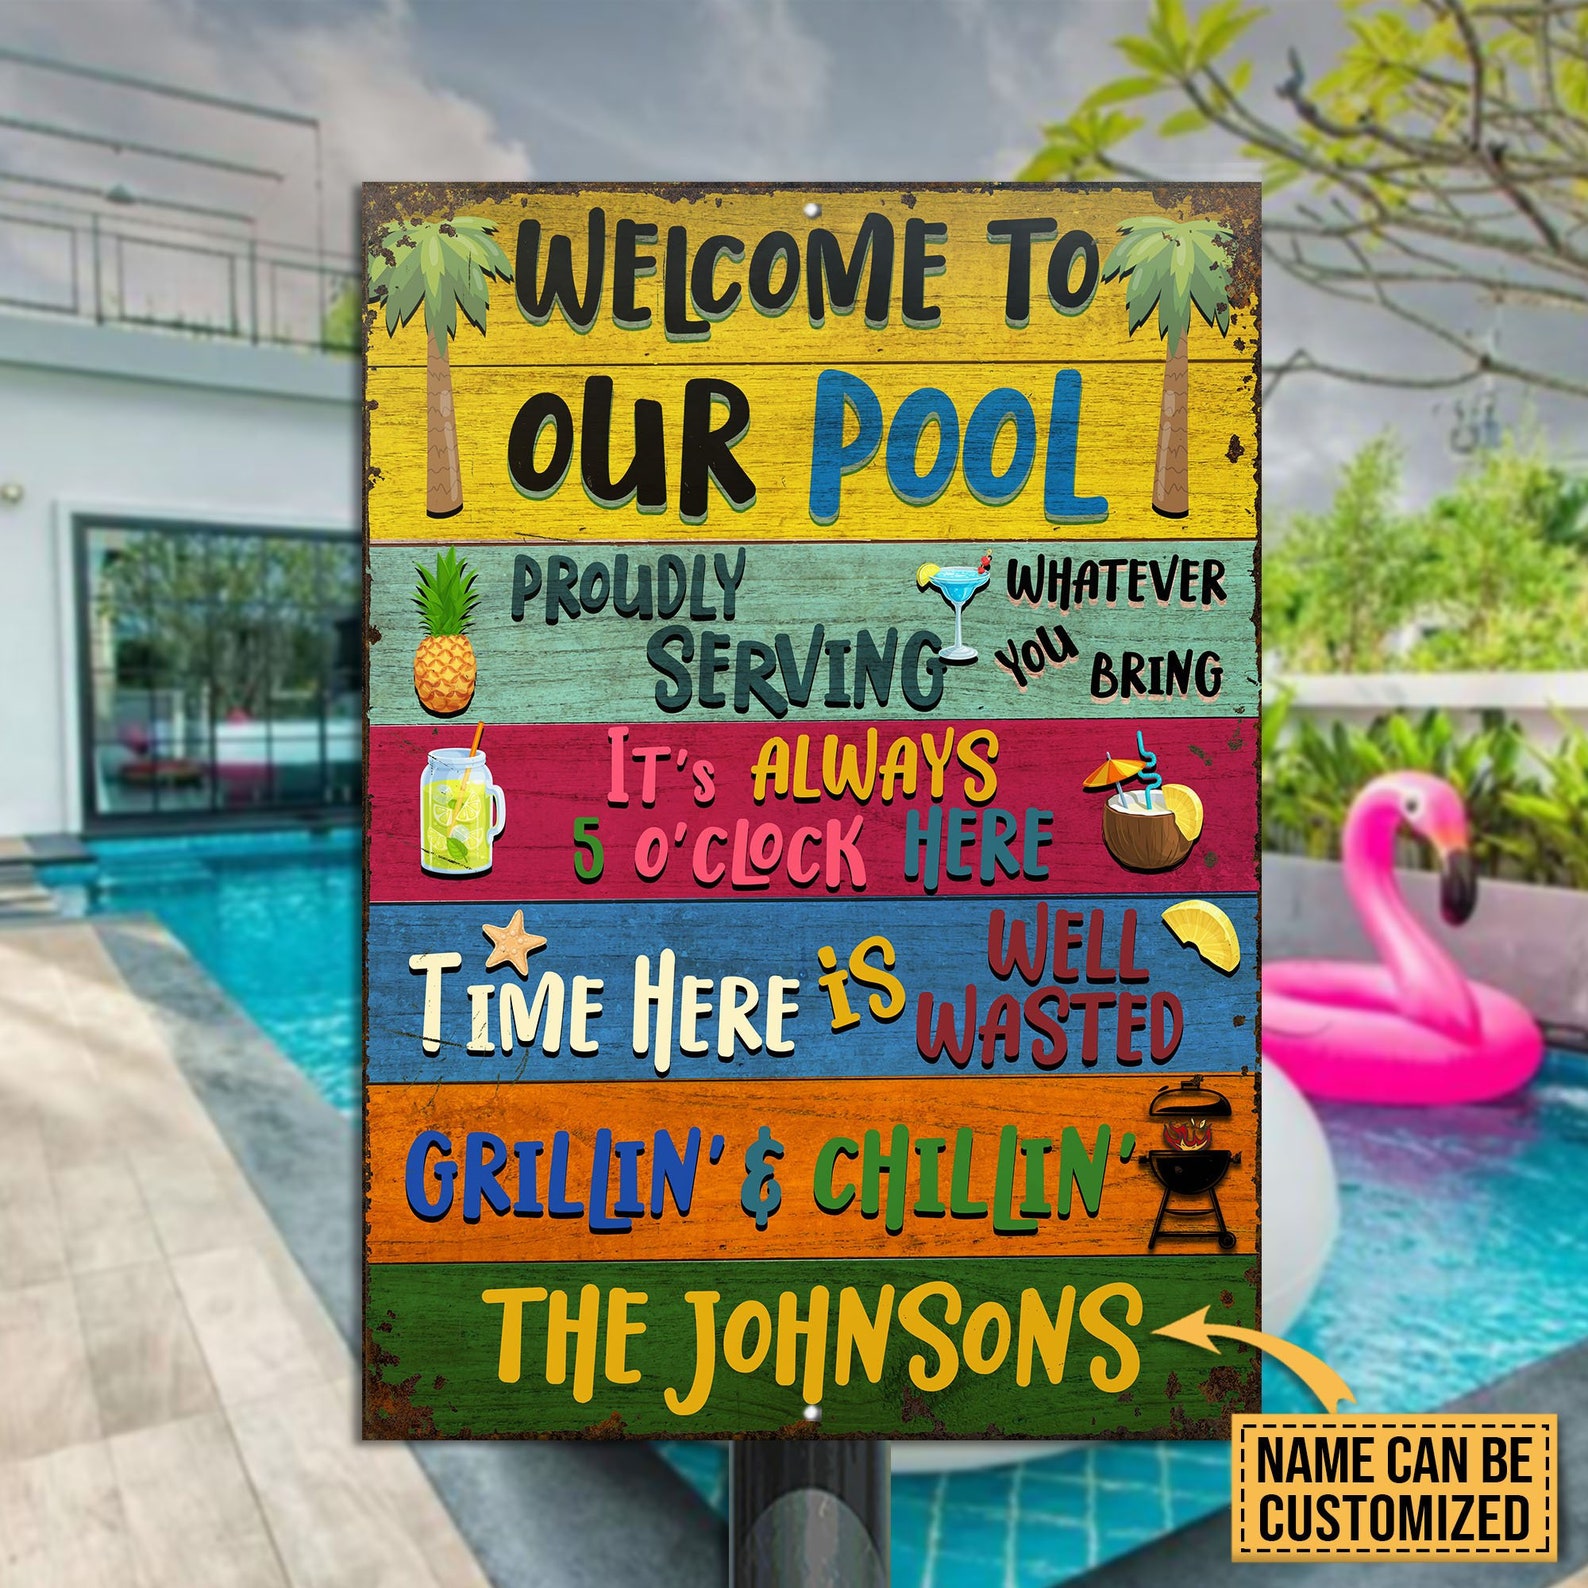 swimming pool signs